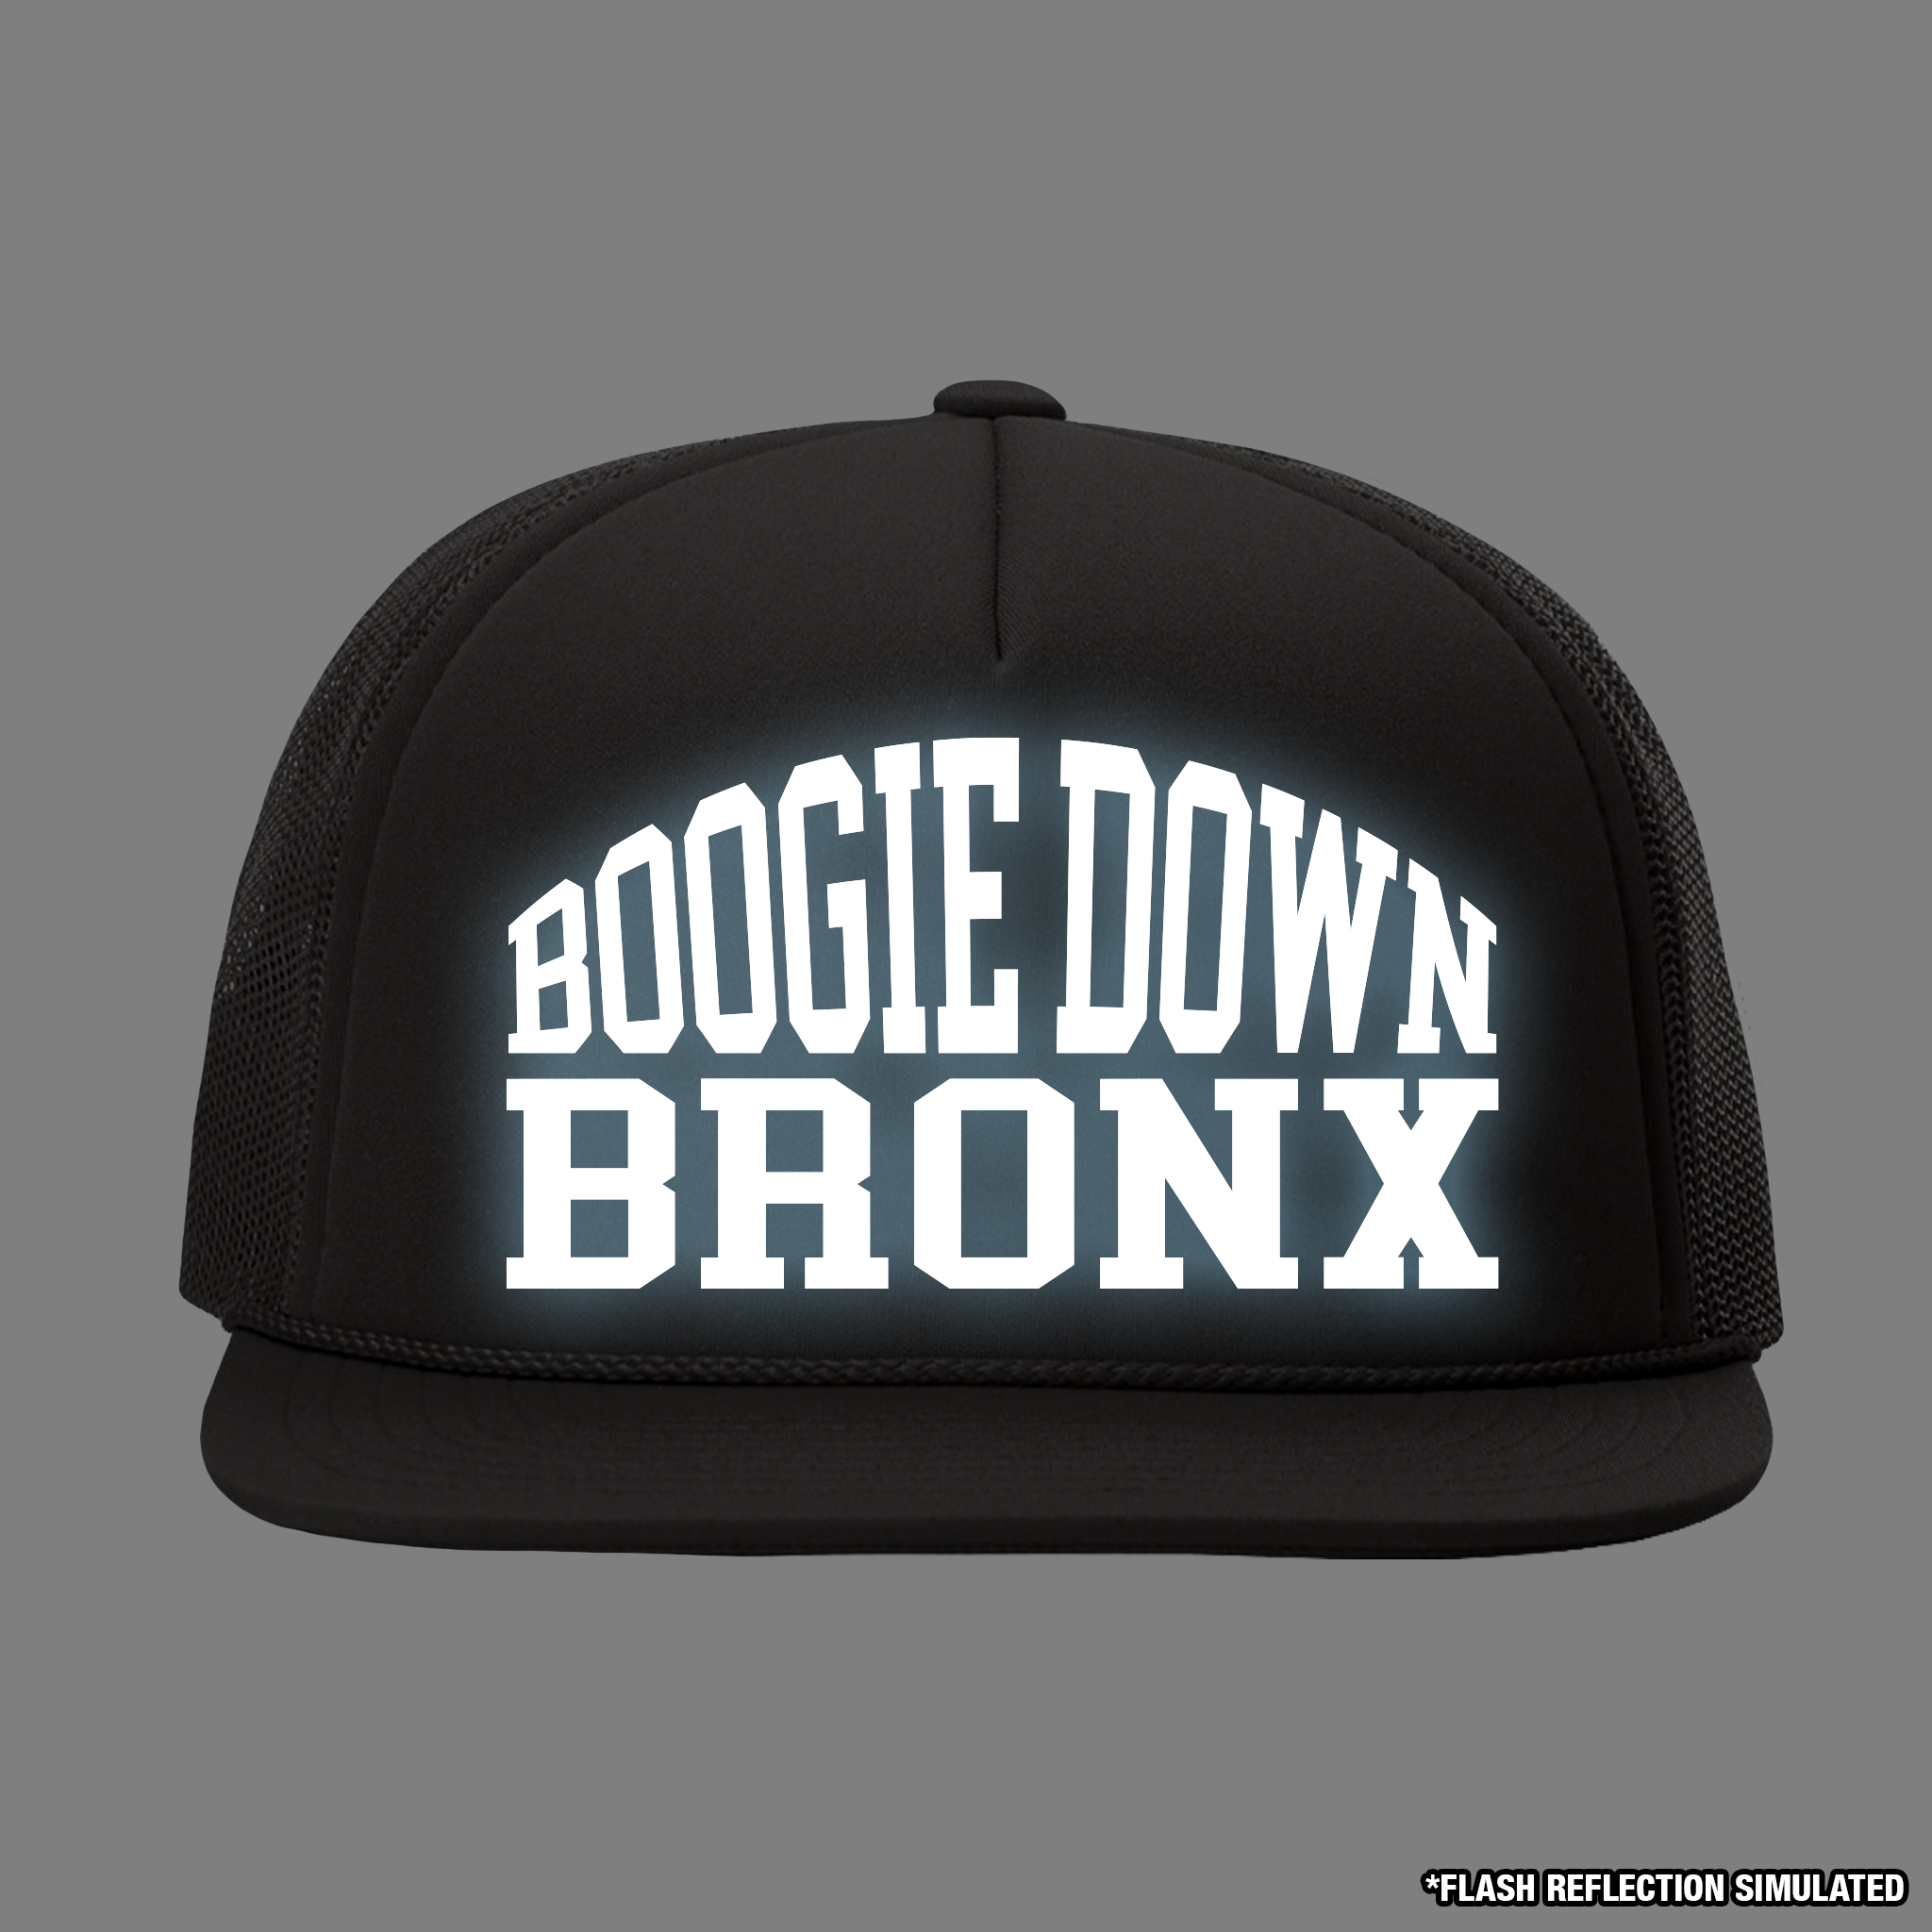 Boogie Down Bronx Reflective Trucker Hat Front with Simulated Reflection